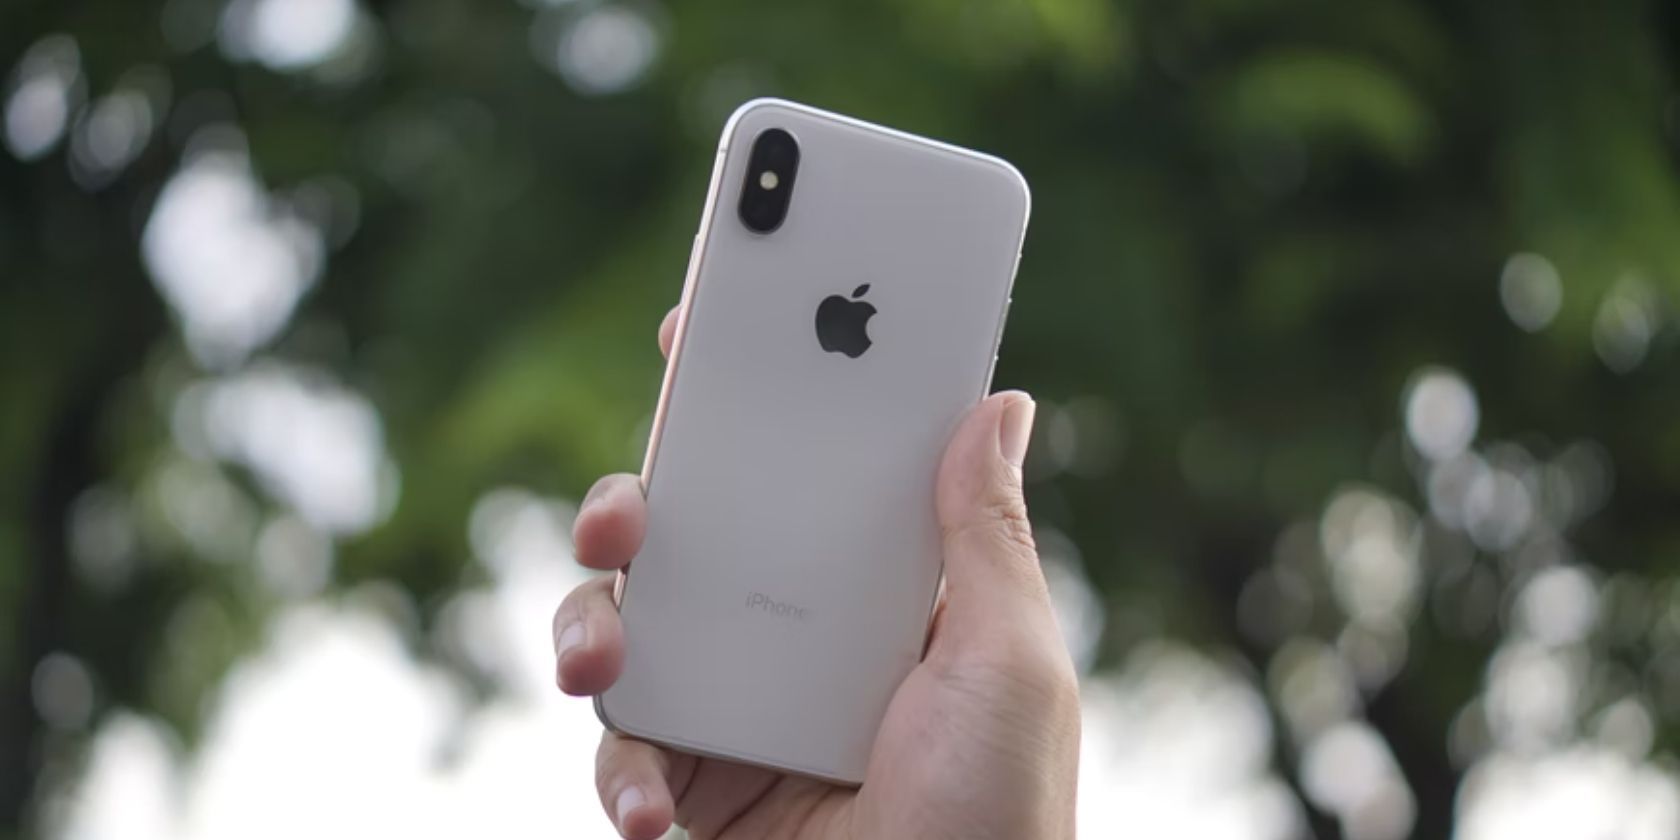 hand holding silver iphone x against background of trees 